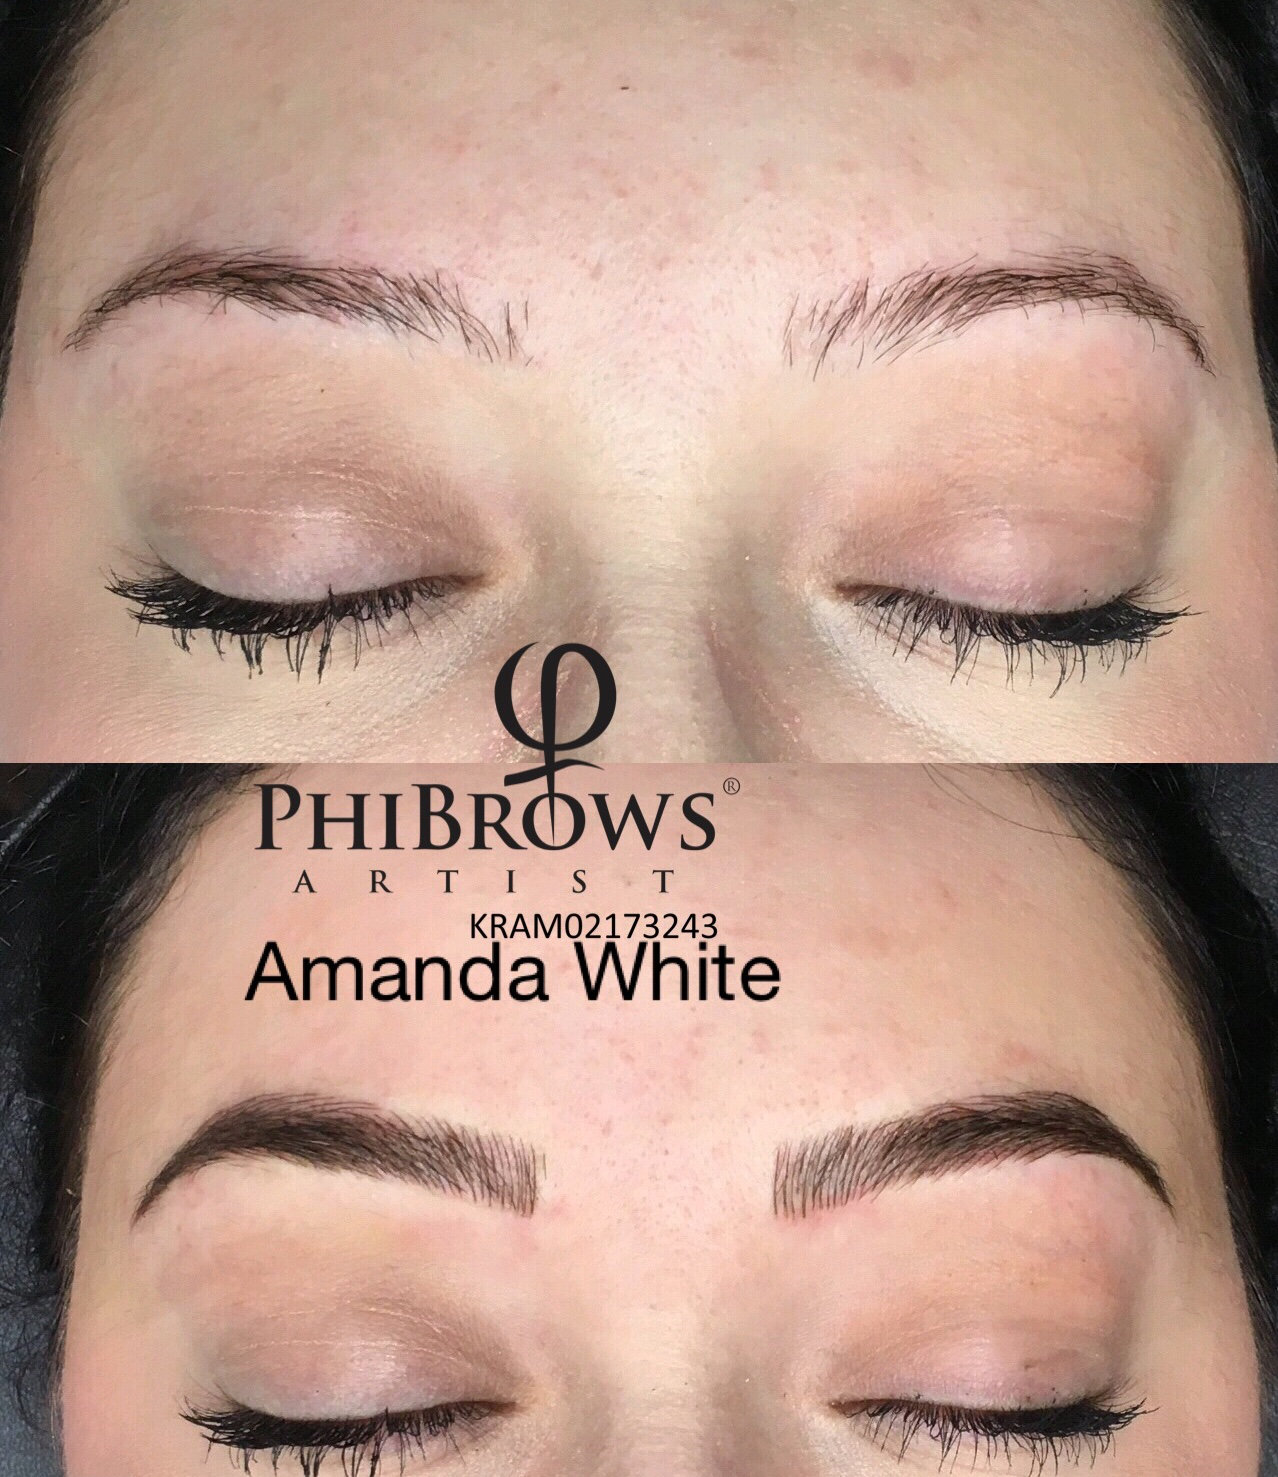 5 Things You Should Know Microblading In Murrieta - DFW Microblading